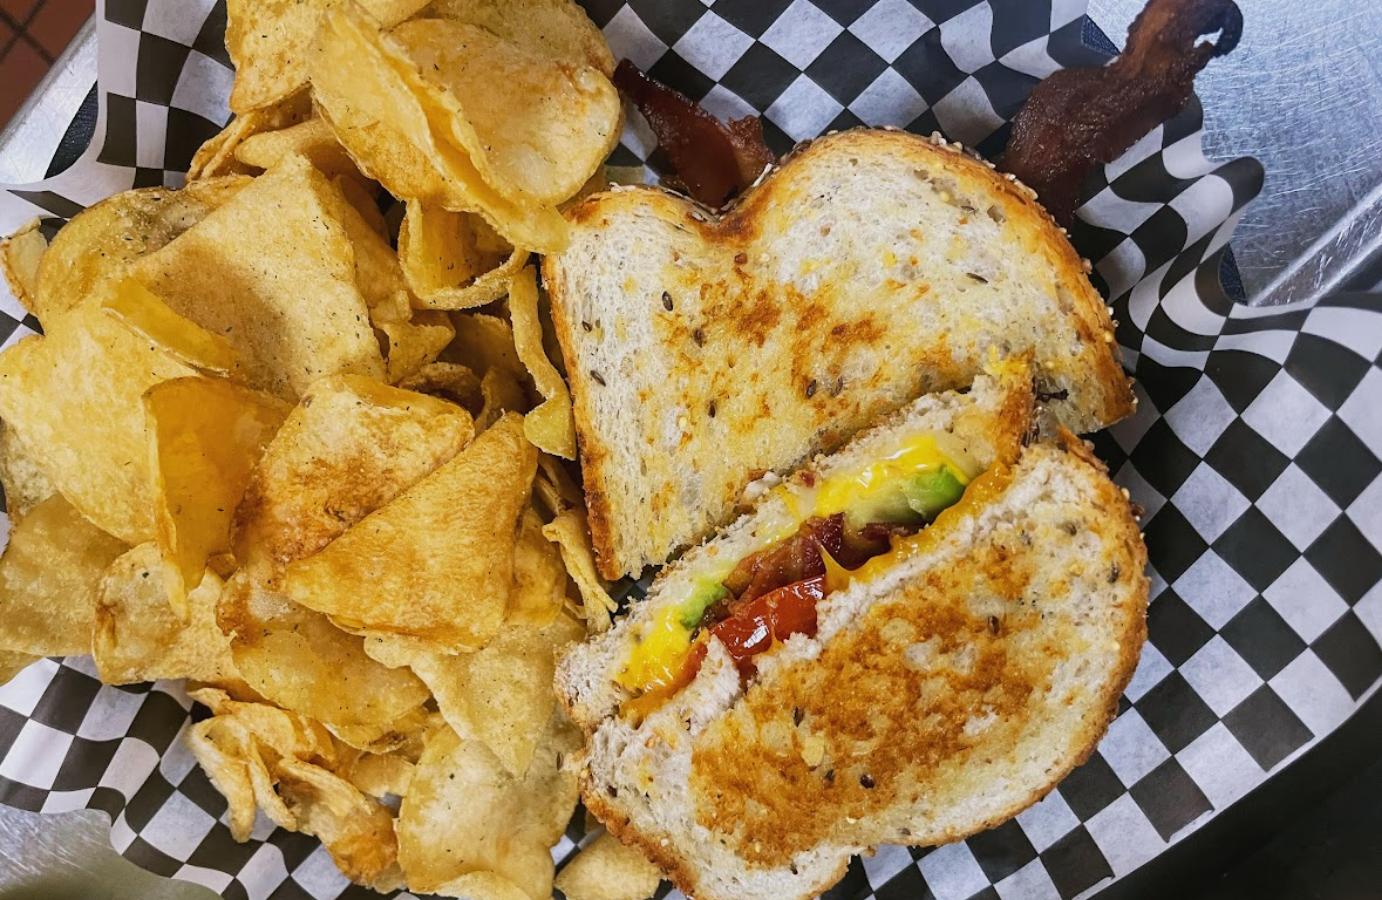 Closeup of a grilled cheese sandwich with chips and bacon on the side